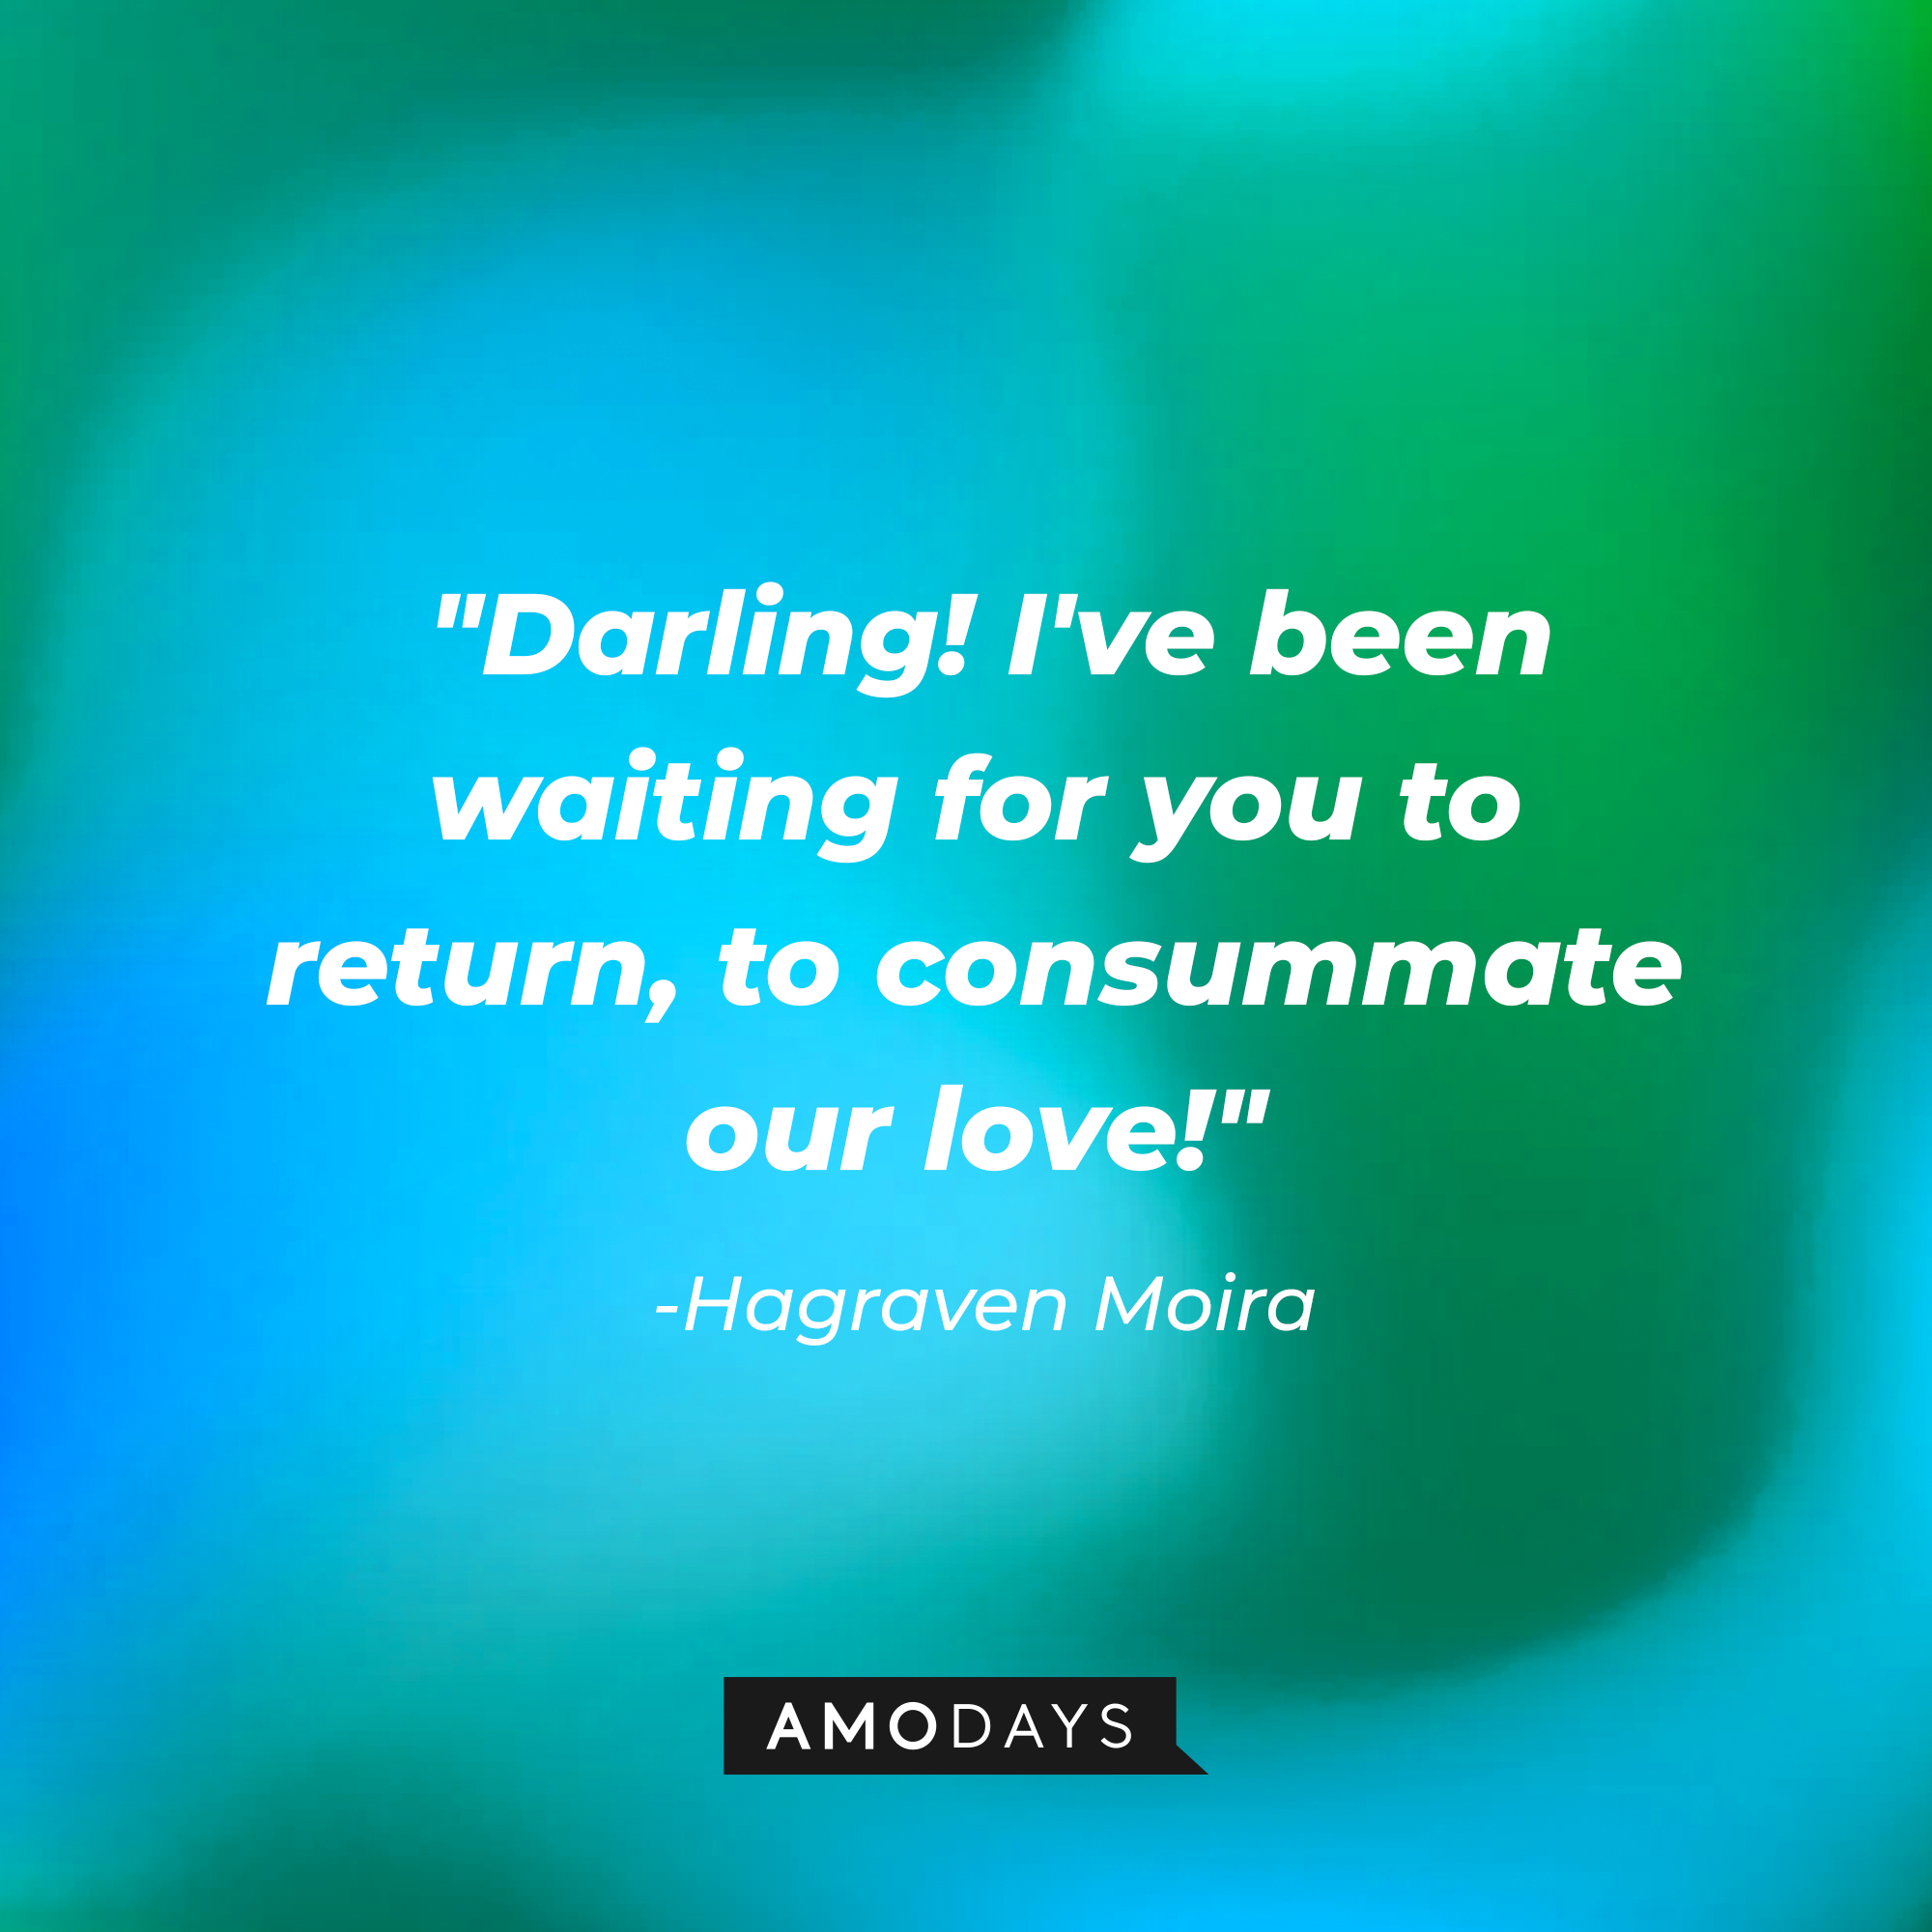 Hagraven Moira's quote:  "Darling! I've been waiting for you to return, to consummate our love!" | Source: Amodays